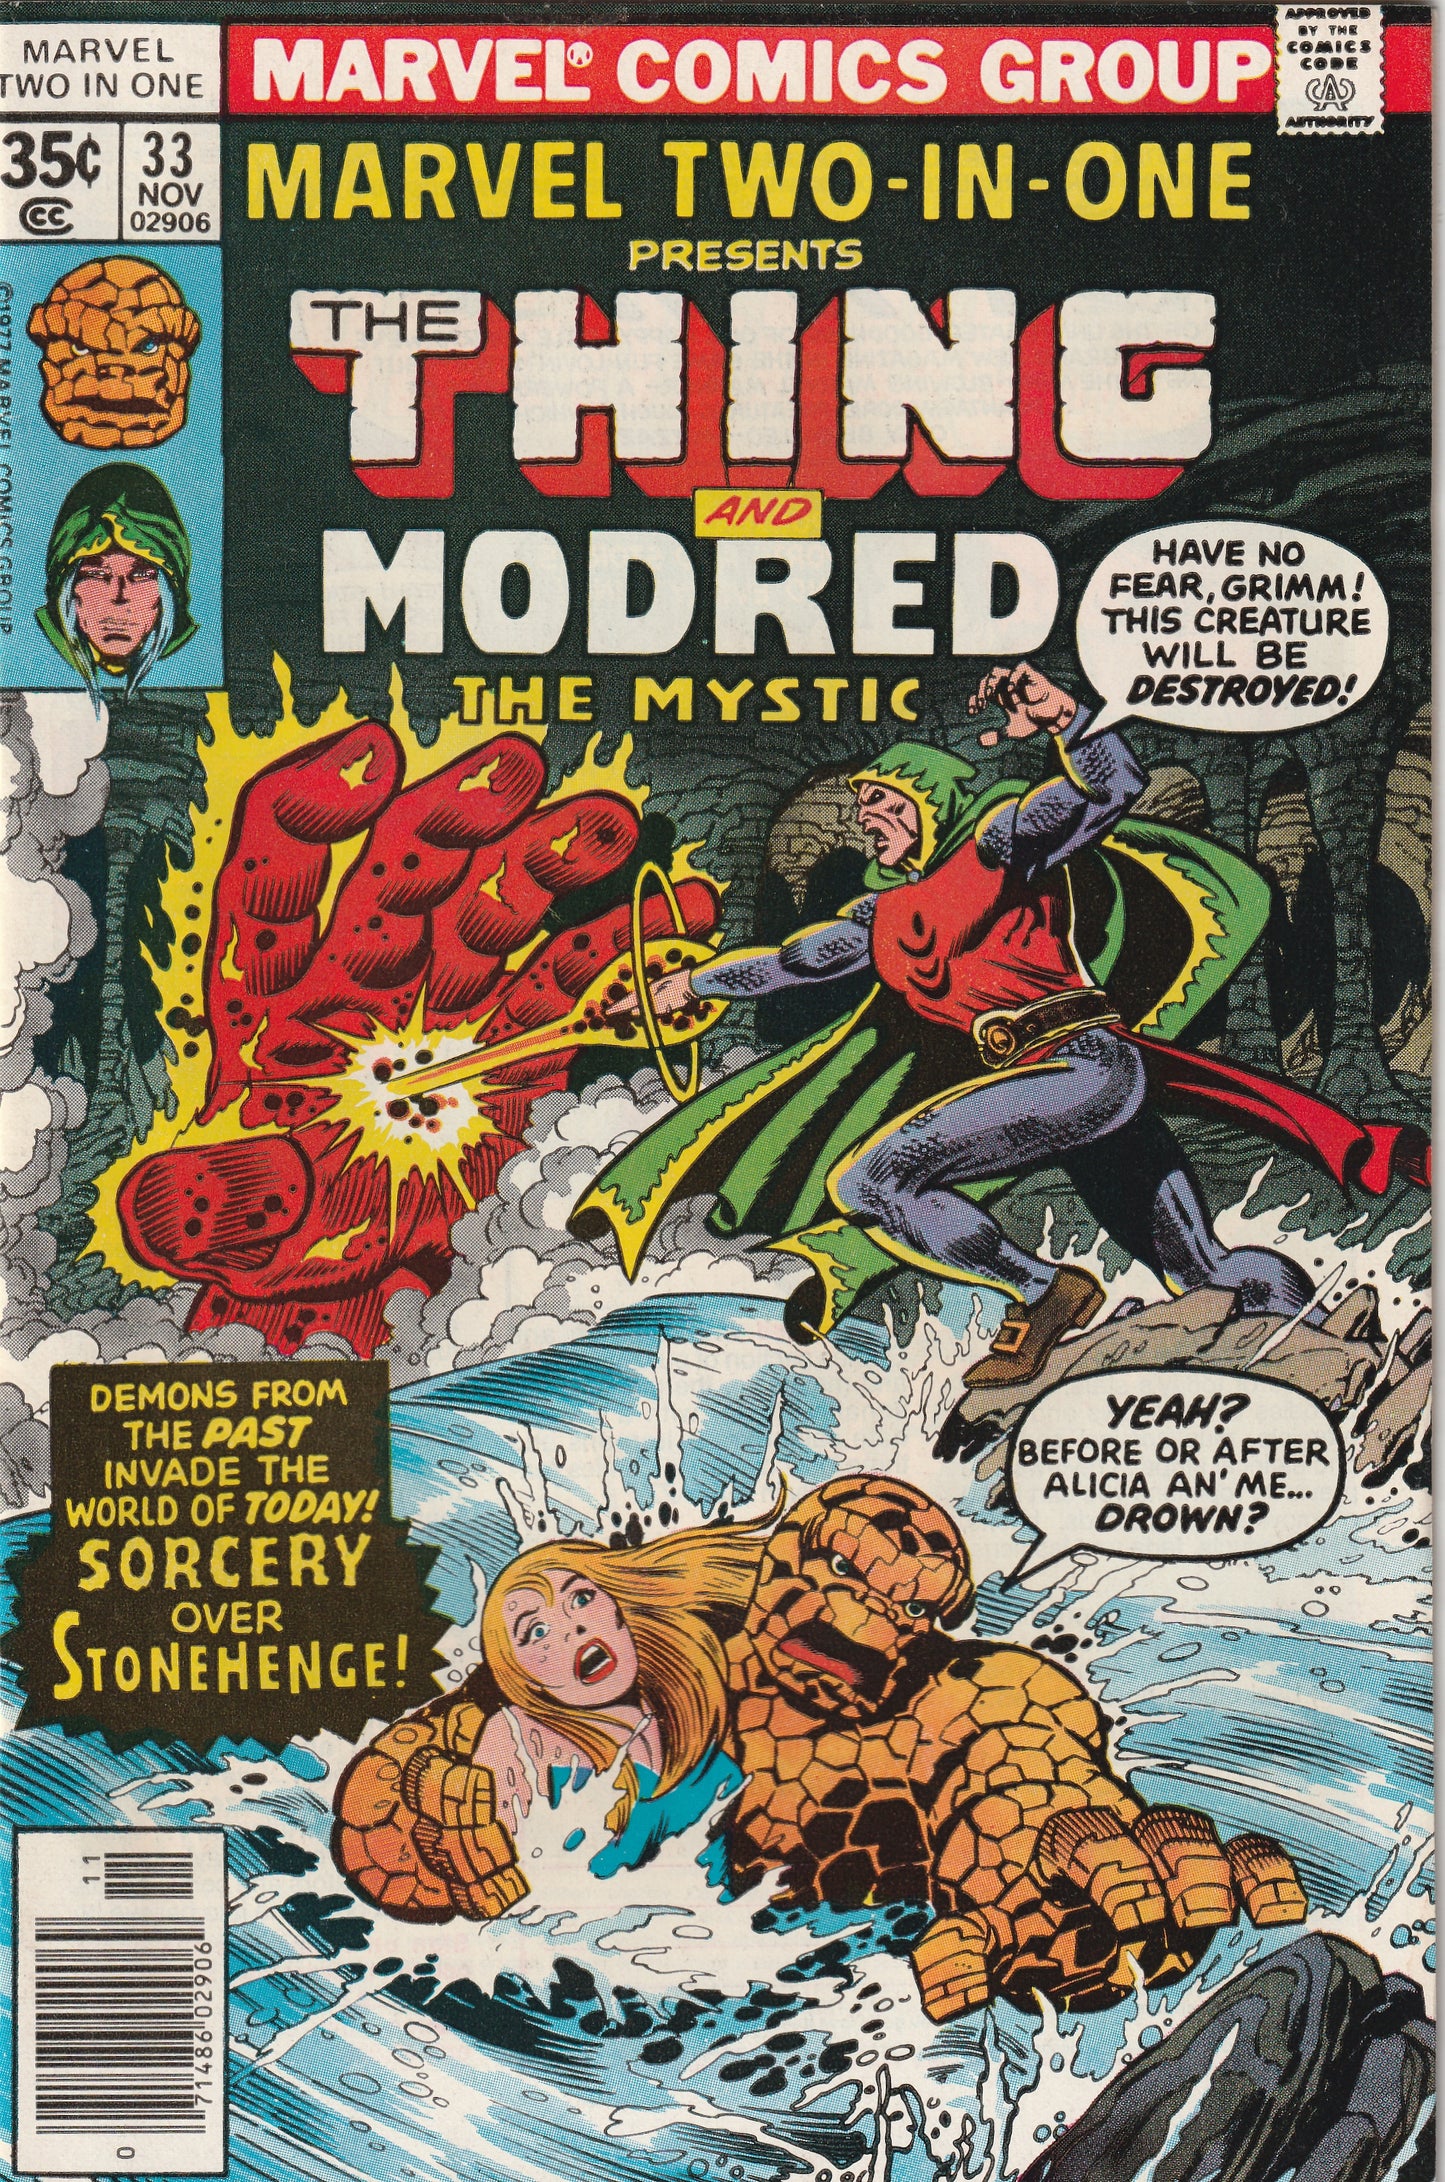 Marvel Two-in-One #33 (1977) - Modred the Mystic